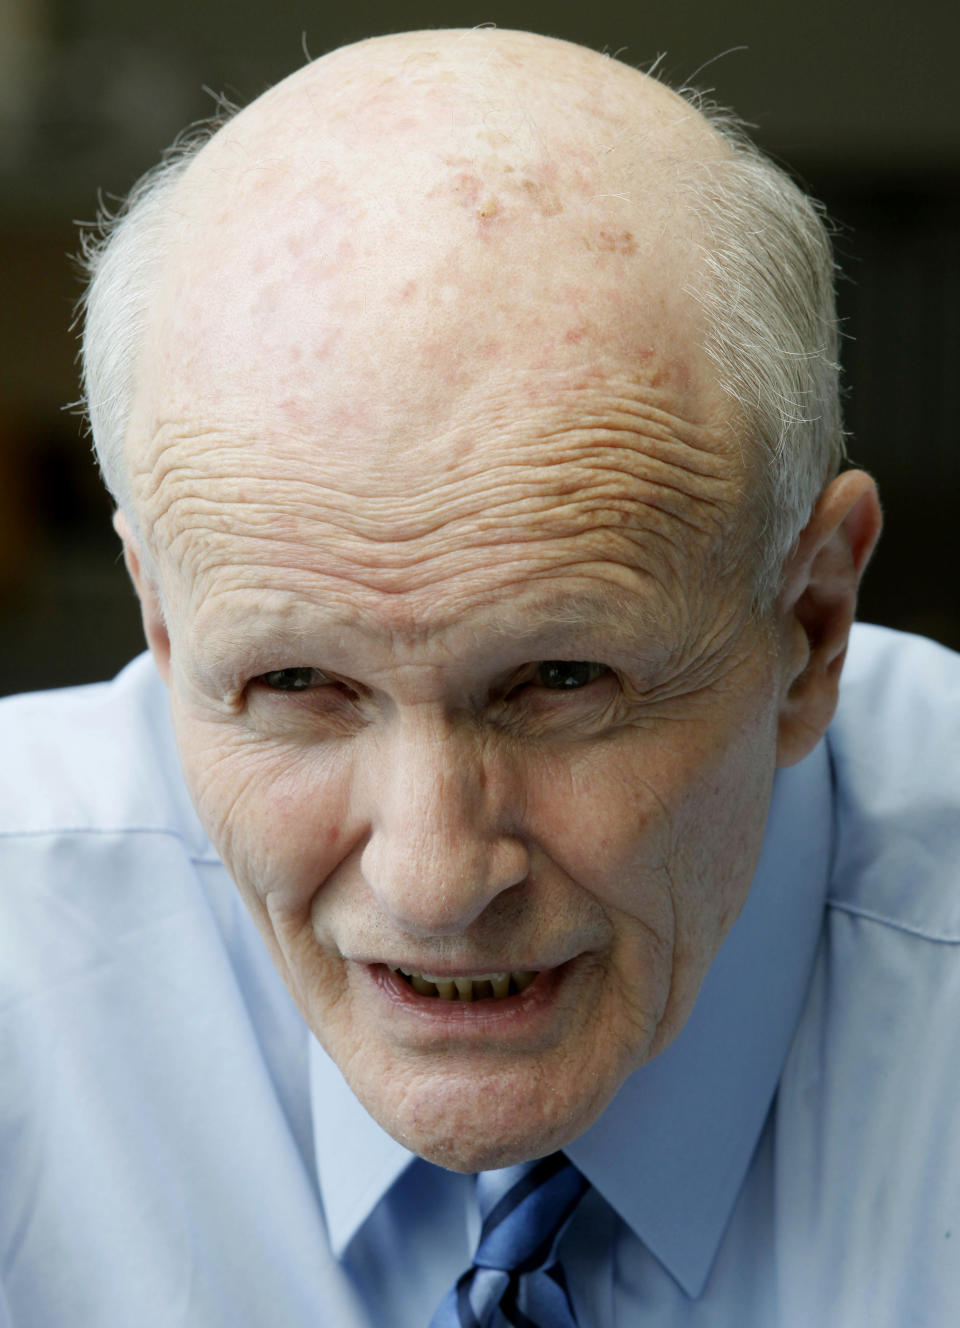 In this photo taken on May 28, 2012, Princeton University Prof. Frank von Hippel speaks during an interview with The Associated Press in Tokyo. Last year's tsunami crisis left Japan's nuclear future in doubt and its reactors idled, rendering its huge stockpile of plutonium useless for now. So, the nuclear industry's plan to produce even more this year has raised a red flag. "It's crazy," said Princeton University professor Frank von Hippel, a leading authority on non-proliferation issues and a former assistant director for national security in the White House Office of Science and Technology. "There is absolutely no reason to do that." Von Hippel stressed that only two other countries reprocess on a large scale: France and Britain, and Britain has decided to give it up. Japan's civilian-use plutonium stockpile is already the fifth-largest in the world, and it has enough plutonium to make about 5,000 simple nuclear warheads, although it does not manufacture them. (AP Photo/Koji Sasahara)